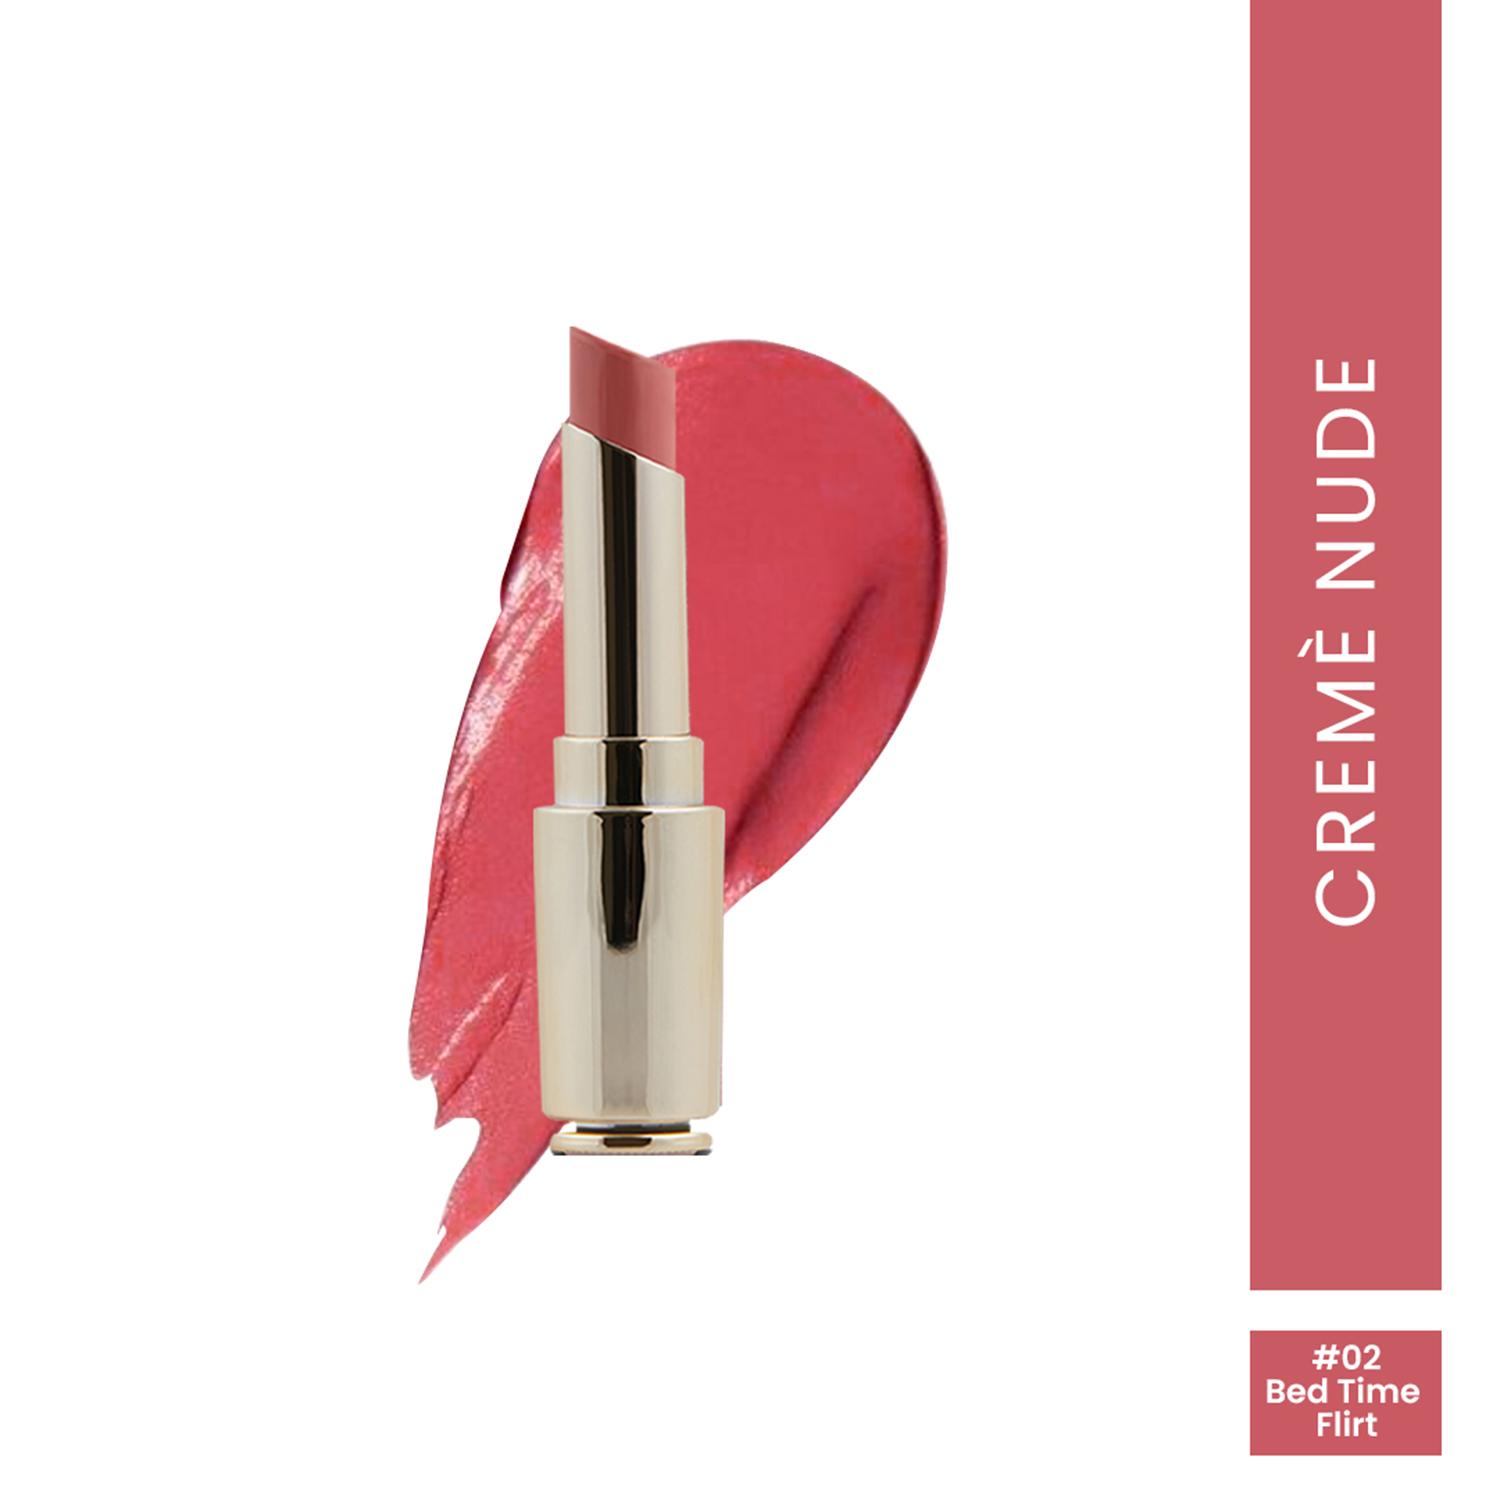 Charmacy Milano Flattering Nude Lipstick - 02 Bed Time Flirt (3.8g)